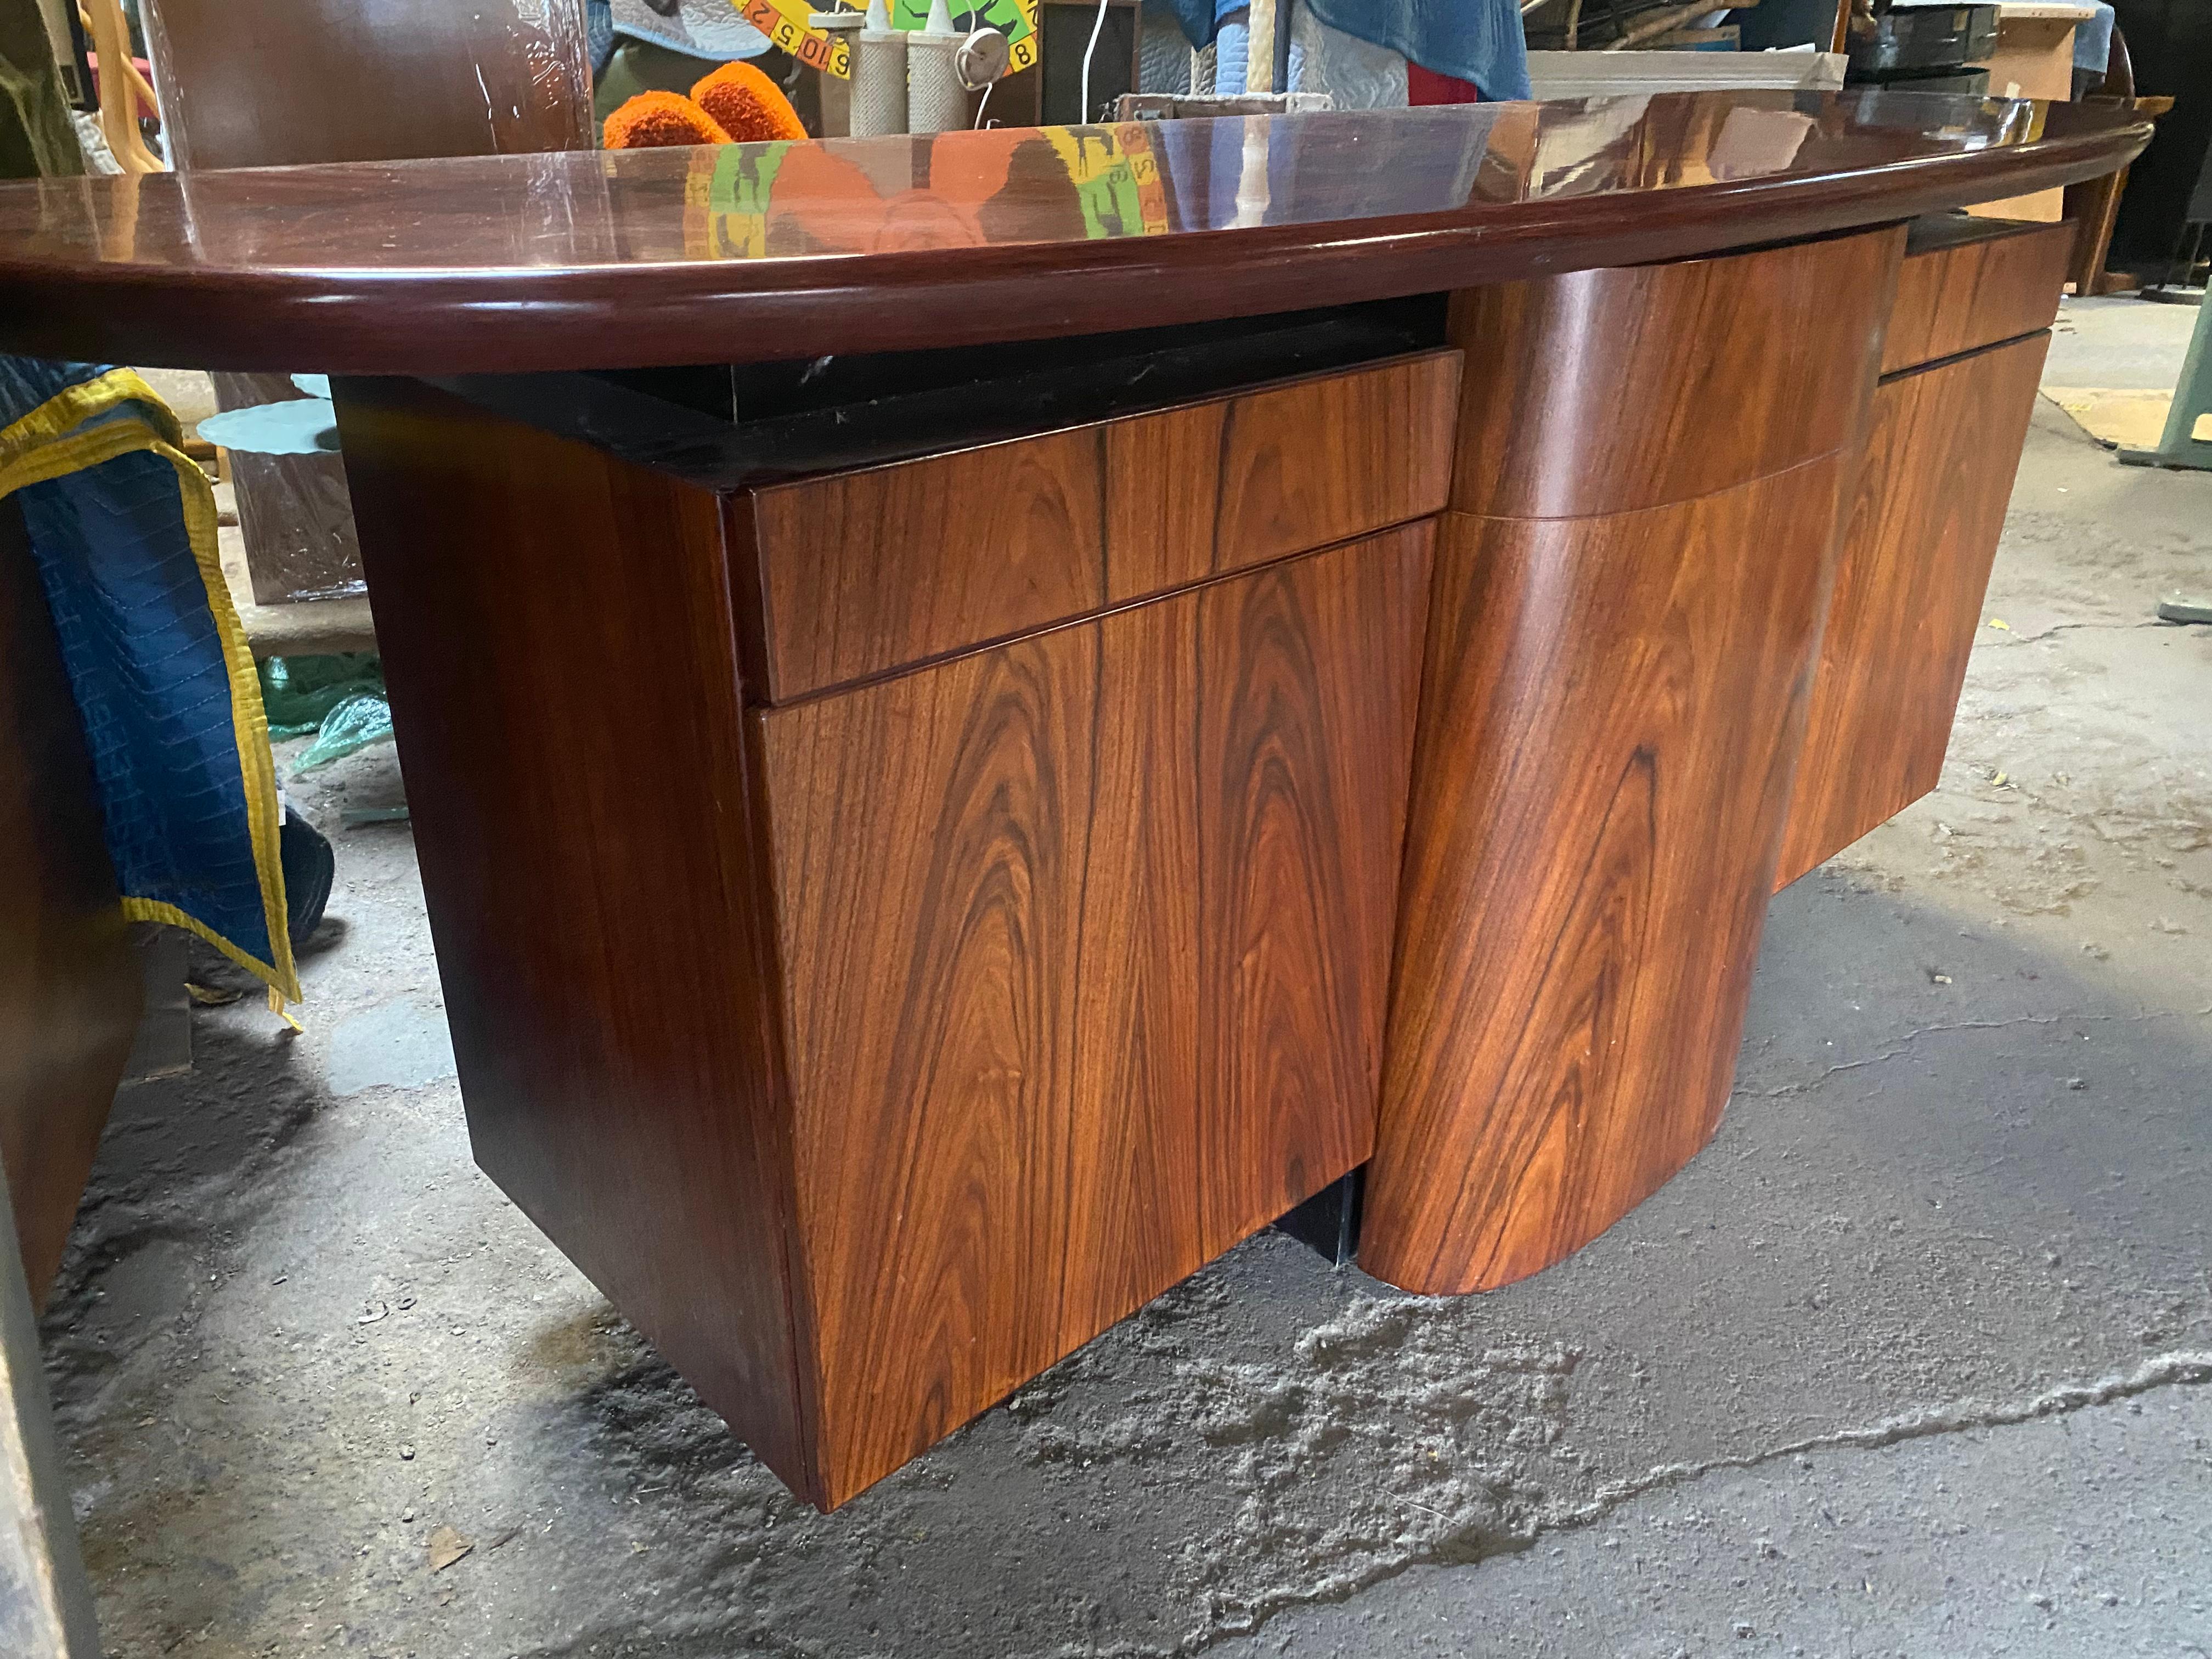 Stunning rosewood sideboard / dry-bar by Skovby Mobelfabrik, Amazing original condition, Gorgeoeus book-match richly grained rosewood. This unit features a sleek design with plenty of storage.. What's unique about this credenza is that the center